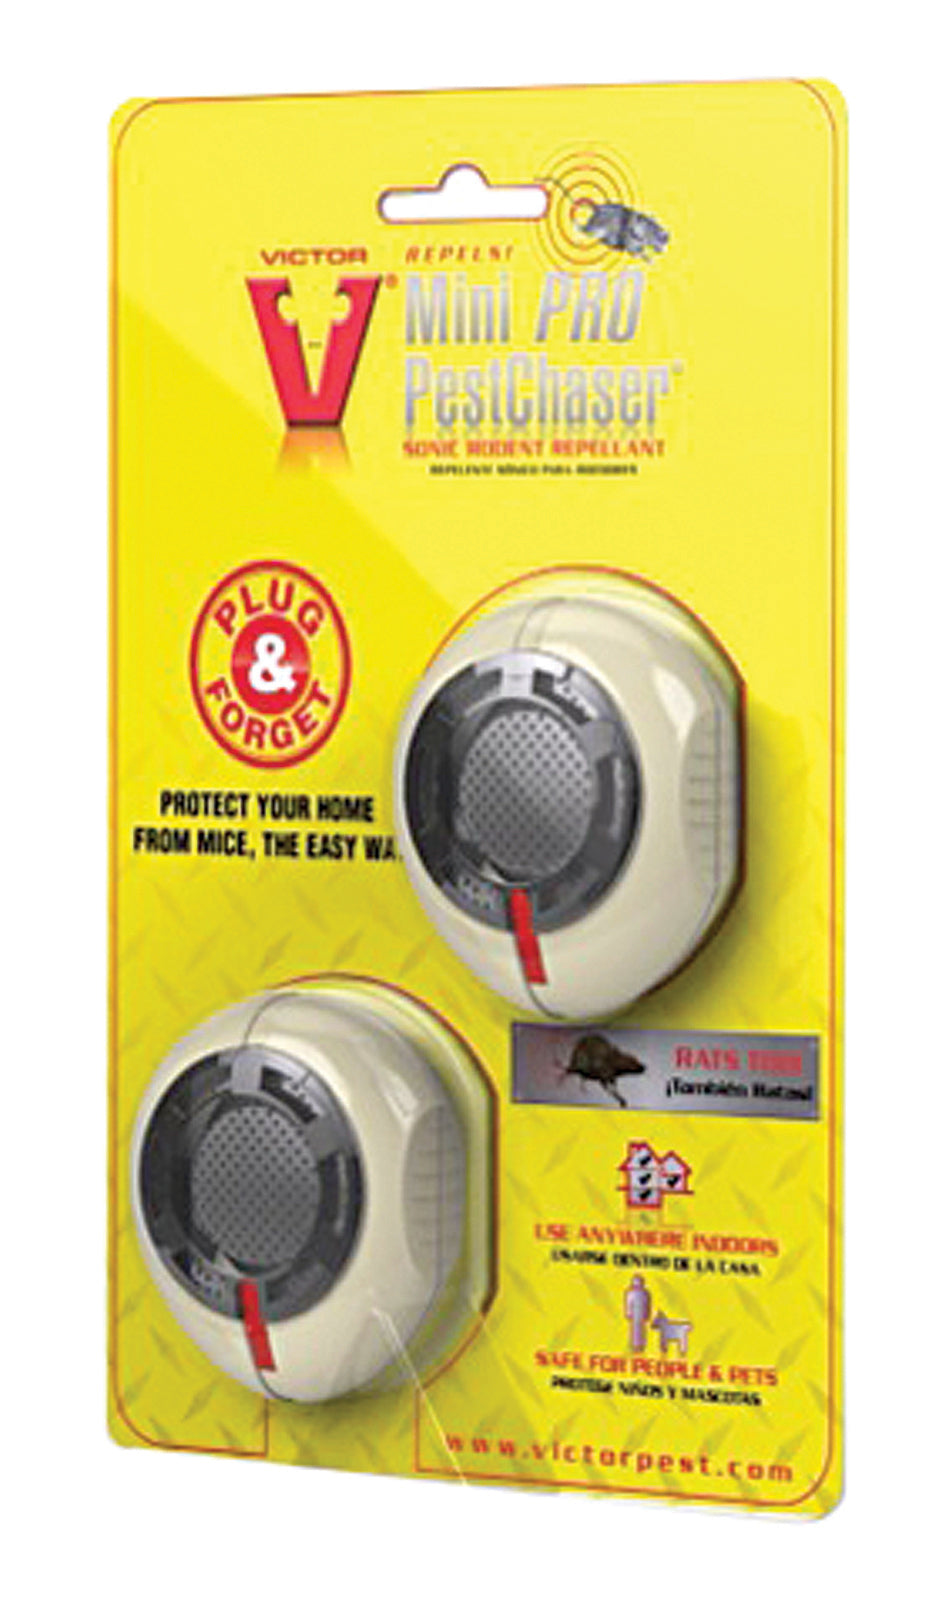 Woodstream Victor Rodnt D-Victor Mini Pro Pest Chaser Sonic Rodent Repellent 2 Pack